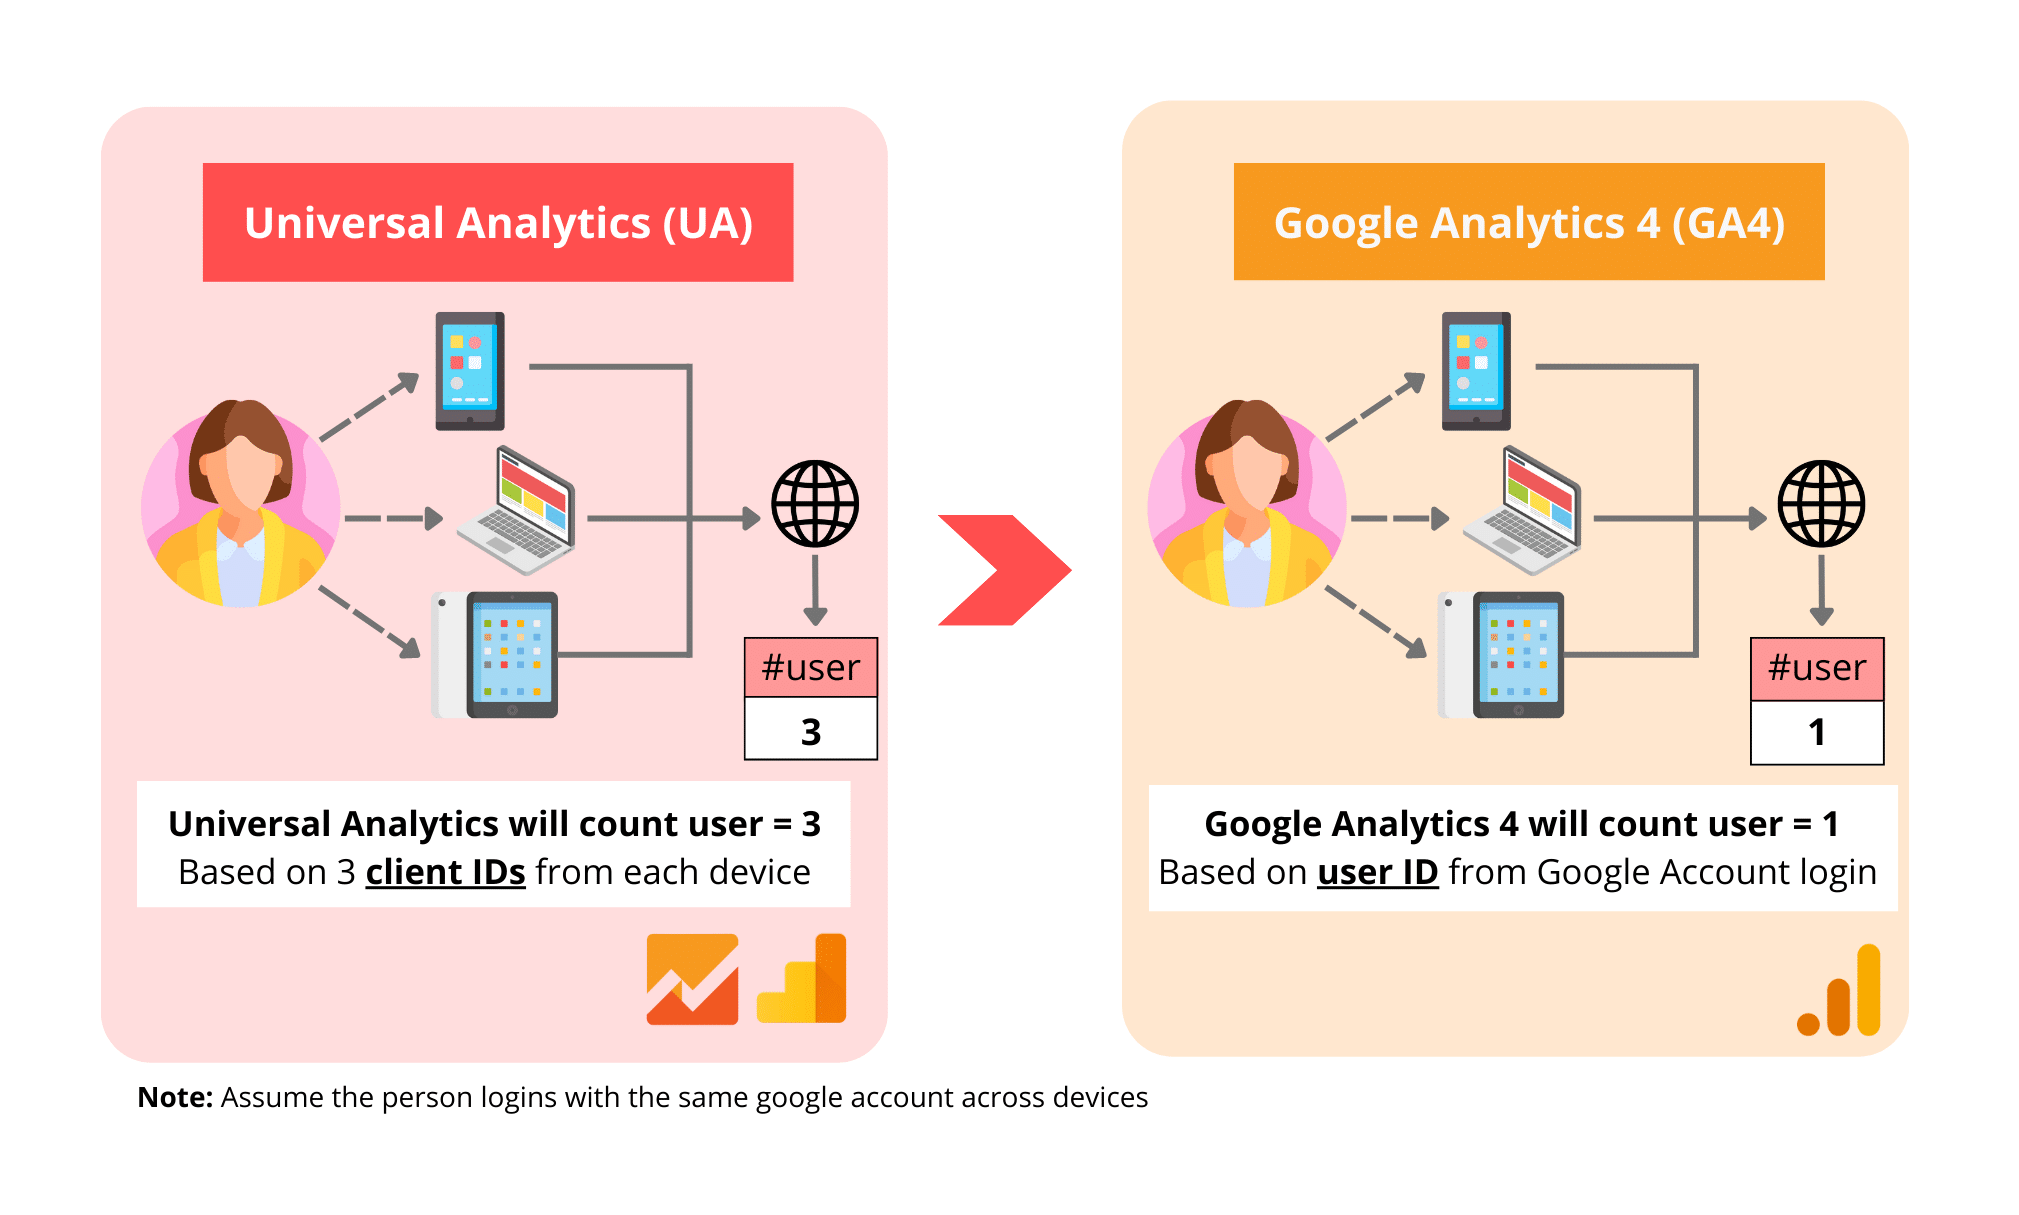 The shift from client IDs to user ID from Universal Analytics to Google Analytics 4.